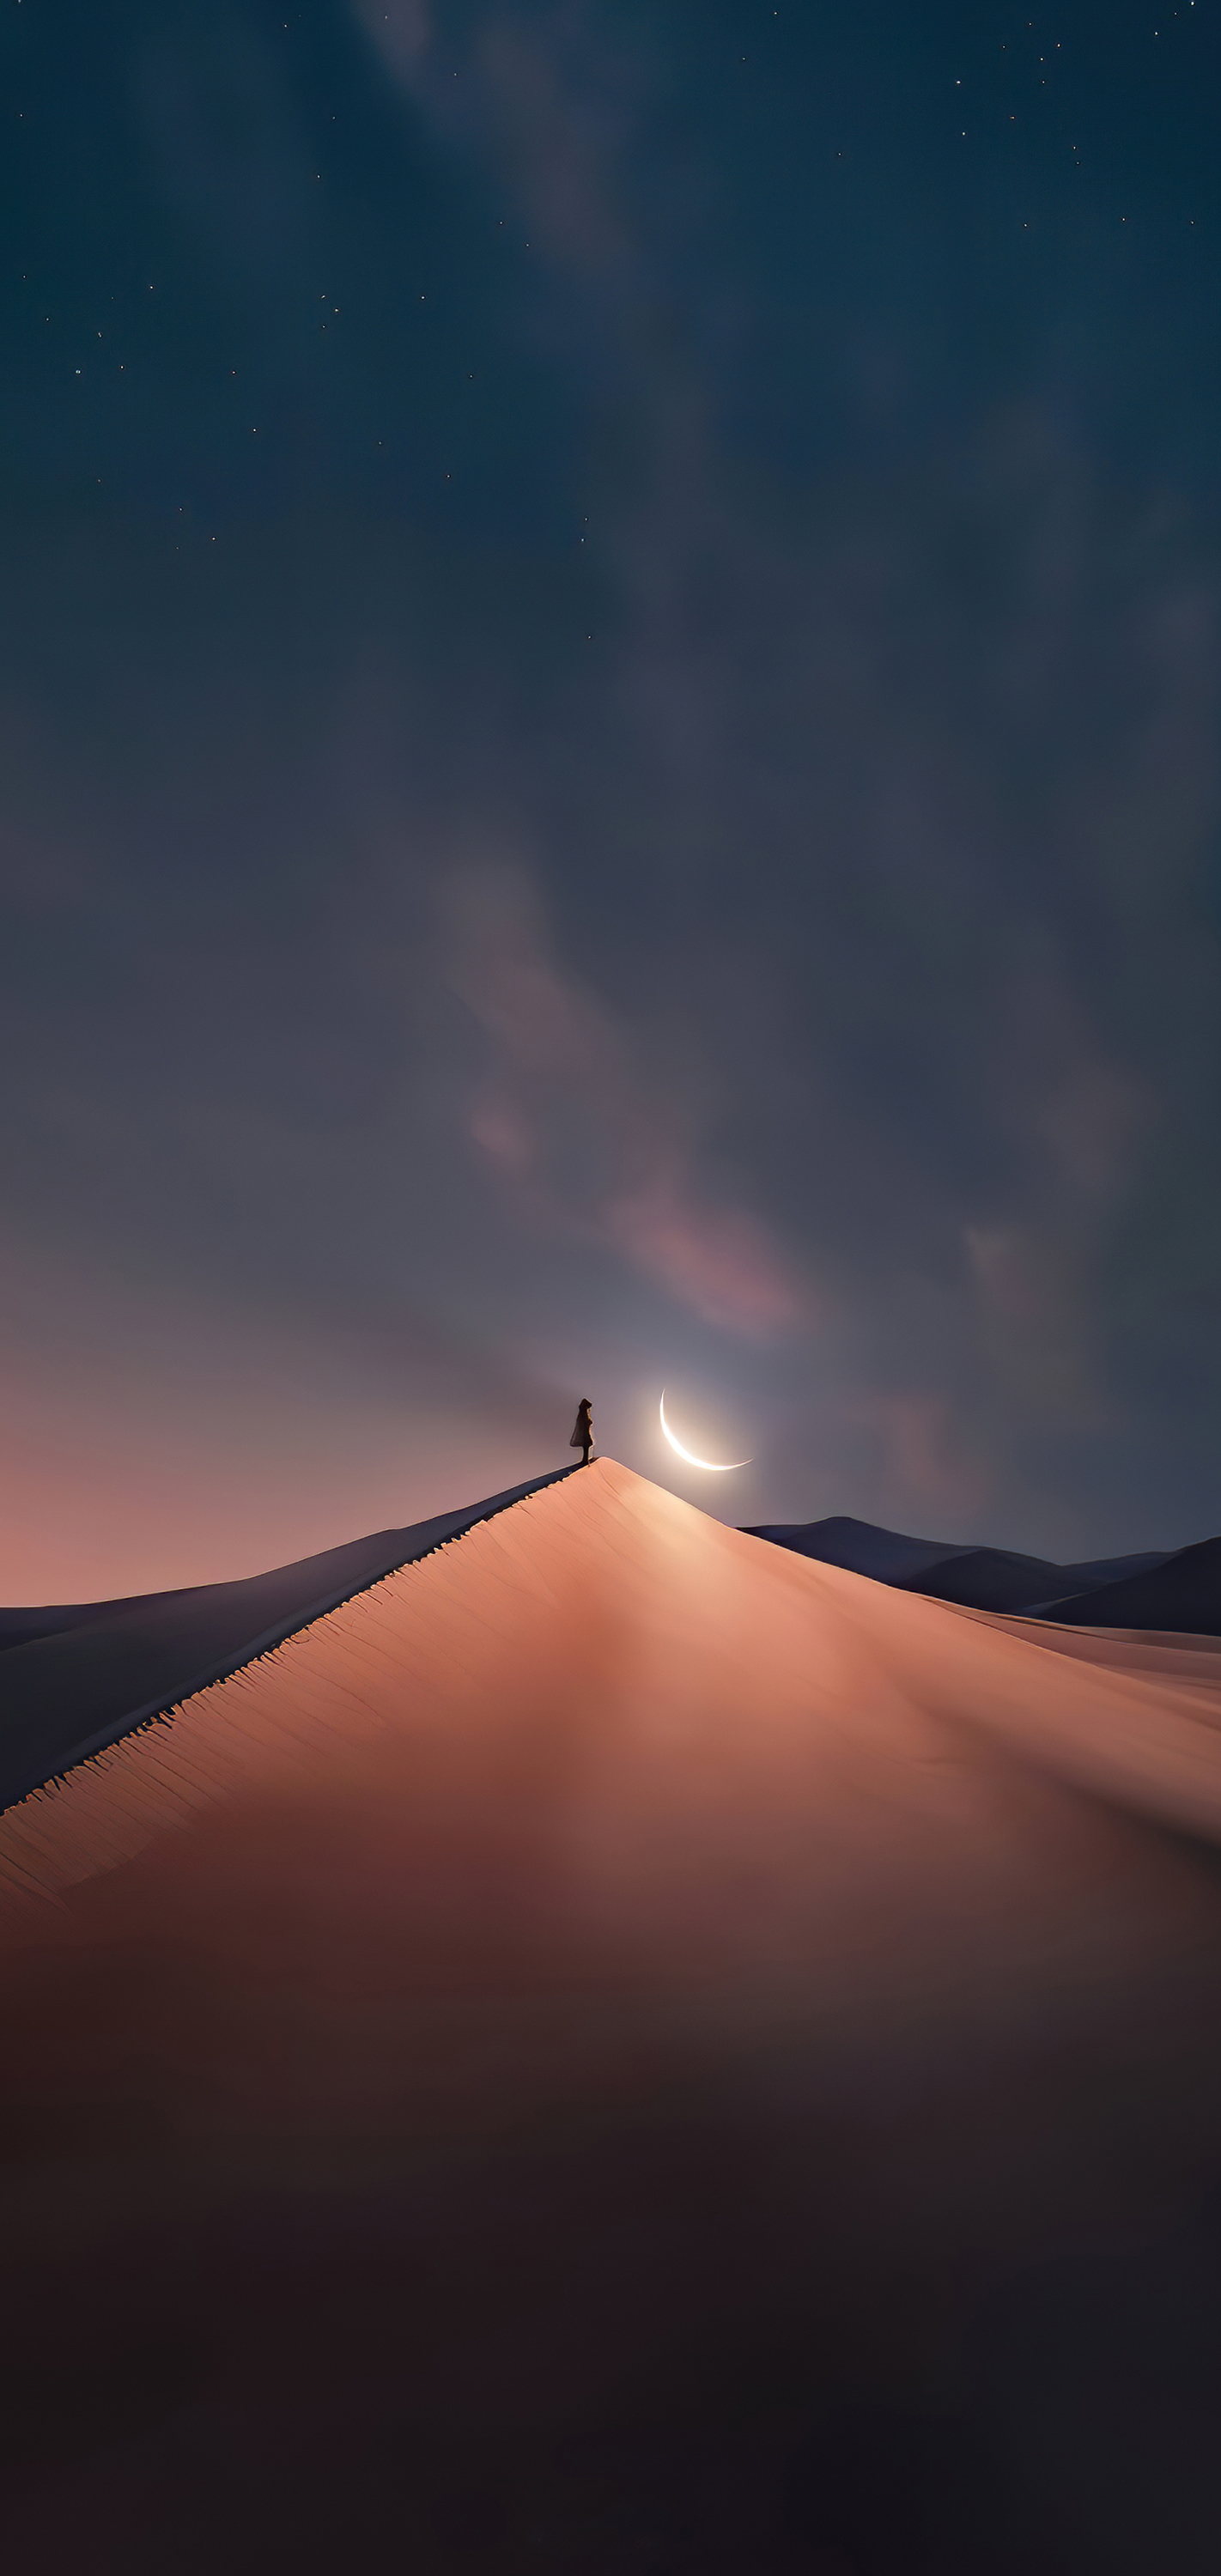 A person standing on a sand dune with a crescent moon in the sky - Desert